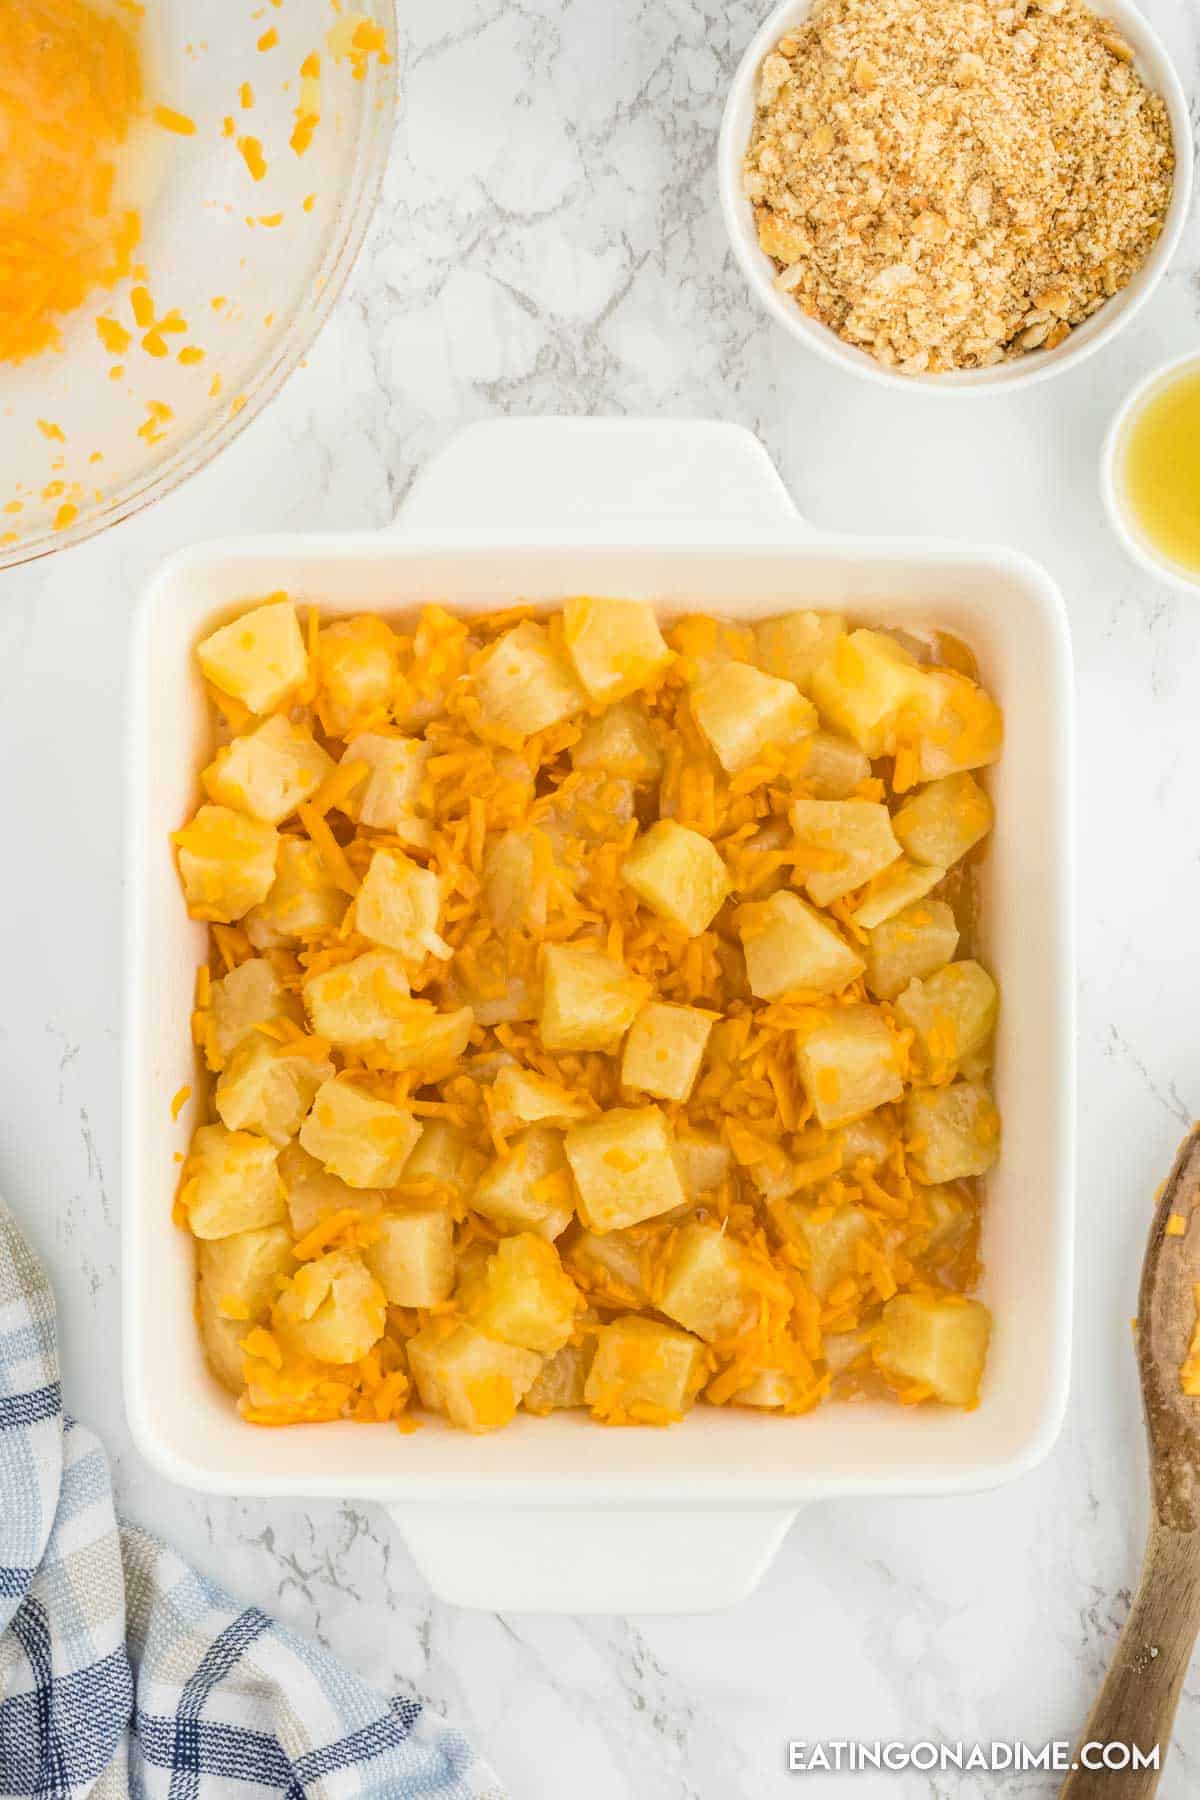 Spread the pineapple mixture in a casserole dish